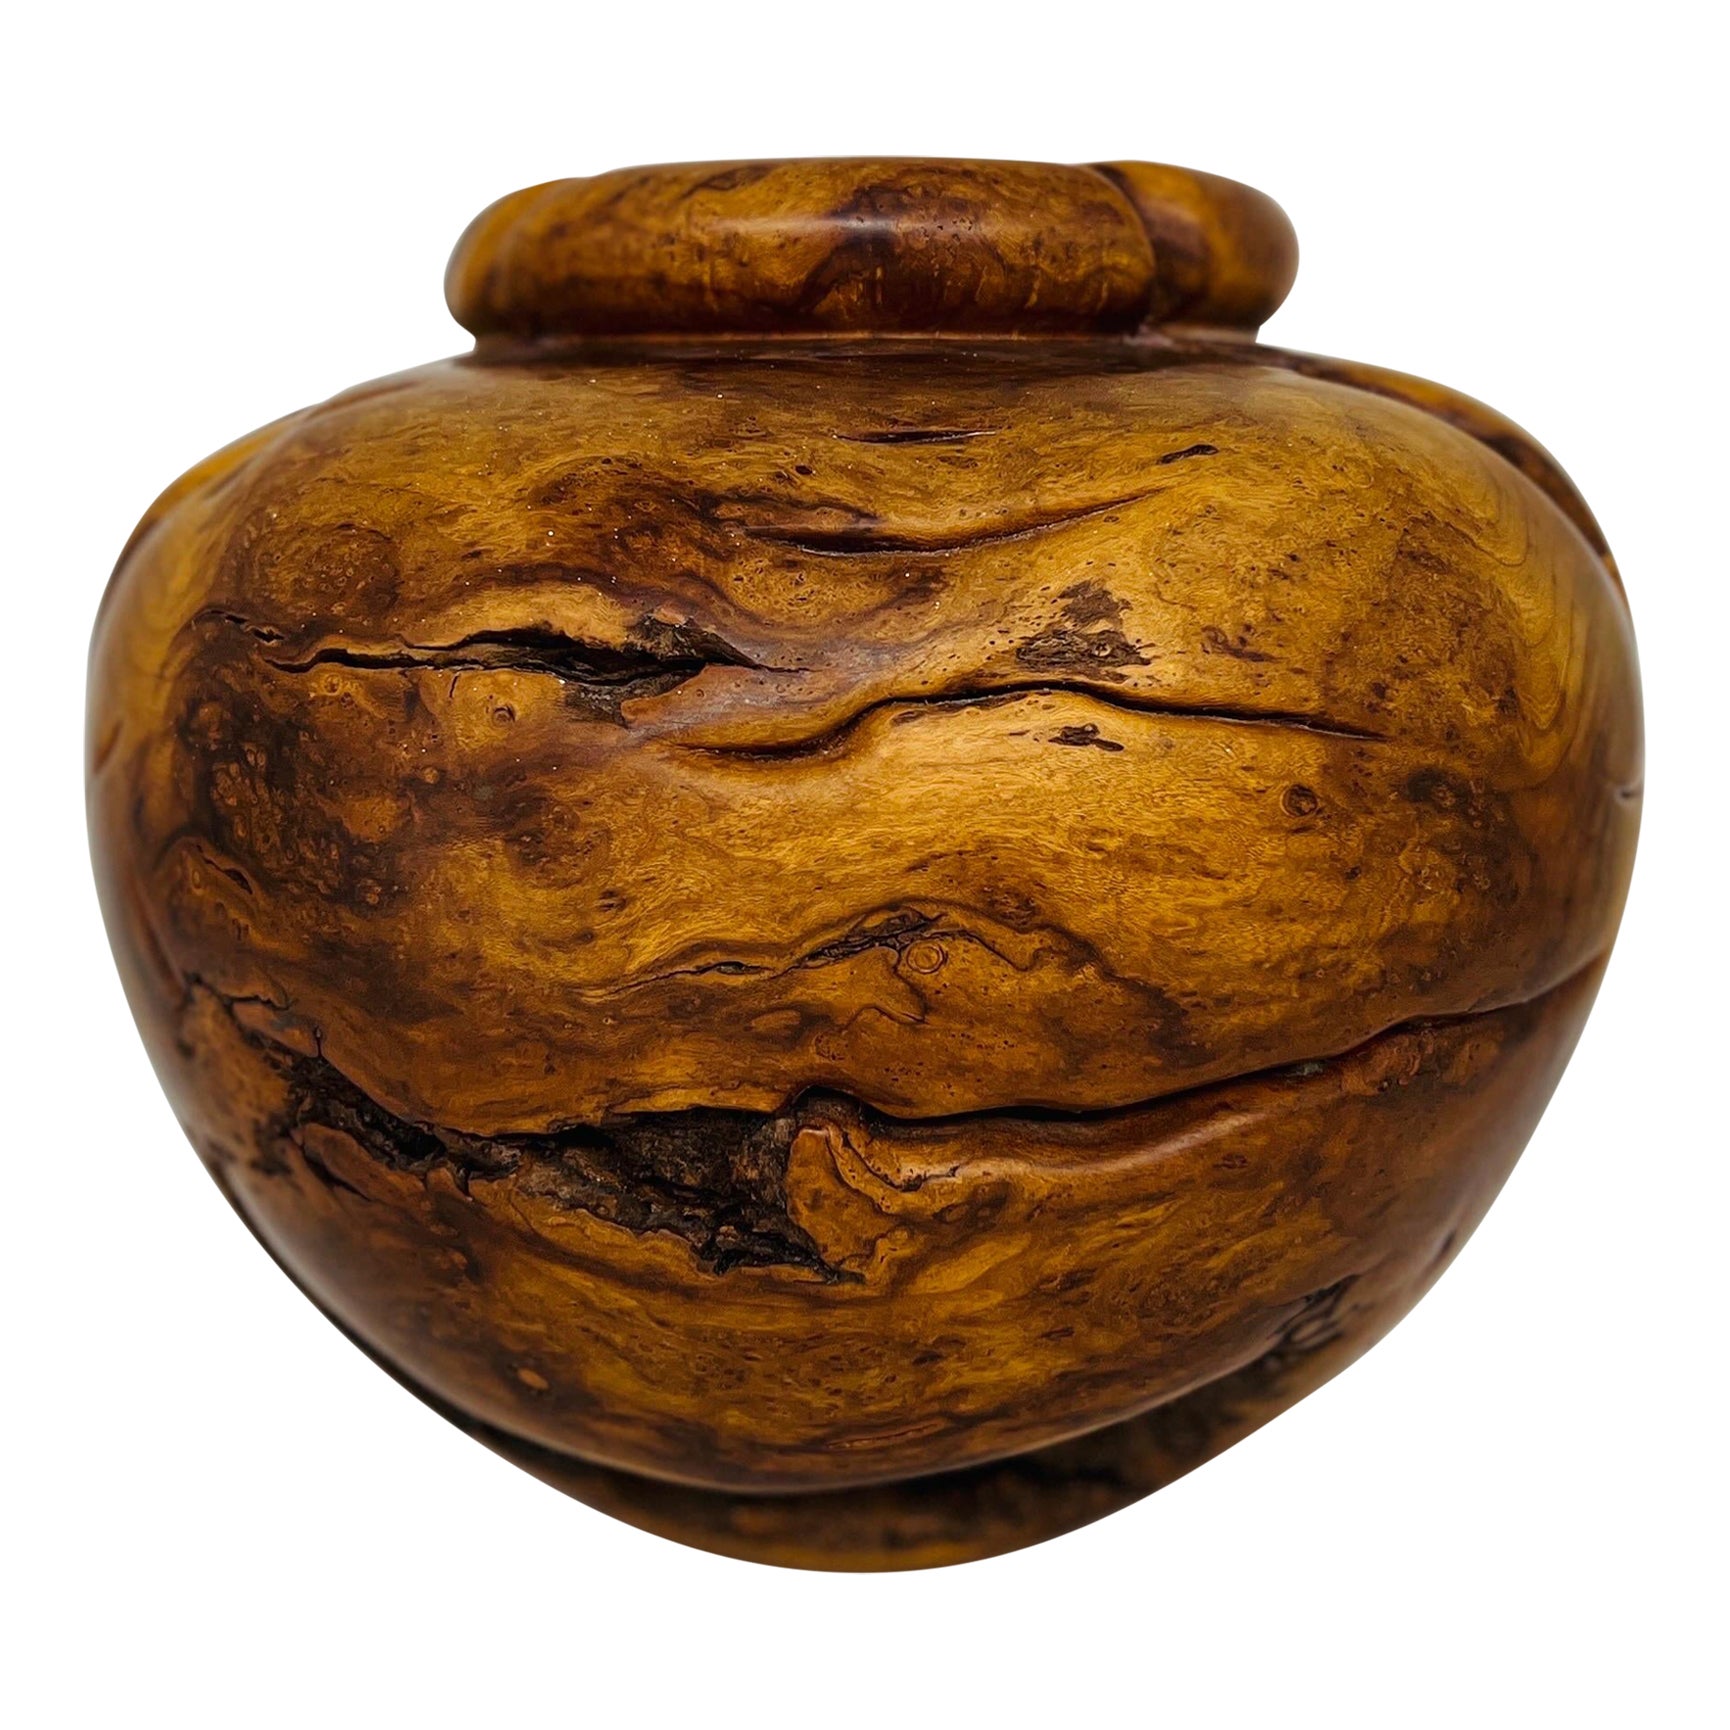 Melvin Lindquist American Cherry Burl Turned Wood Vessel, circa 1982 For Sale